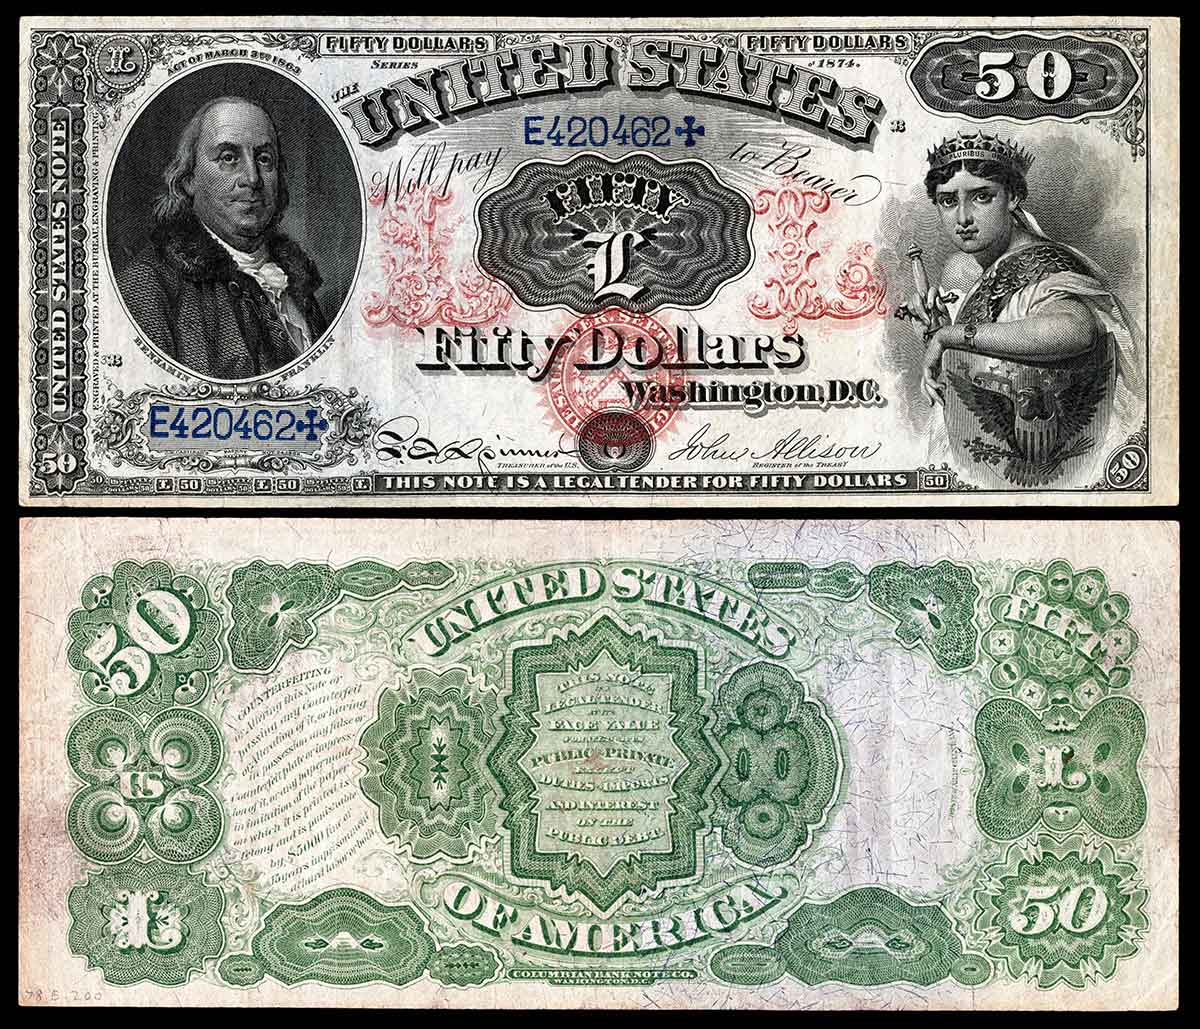 A Brief Introduction to the Many Types of U.S. Banknotes